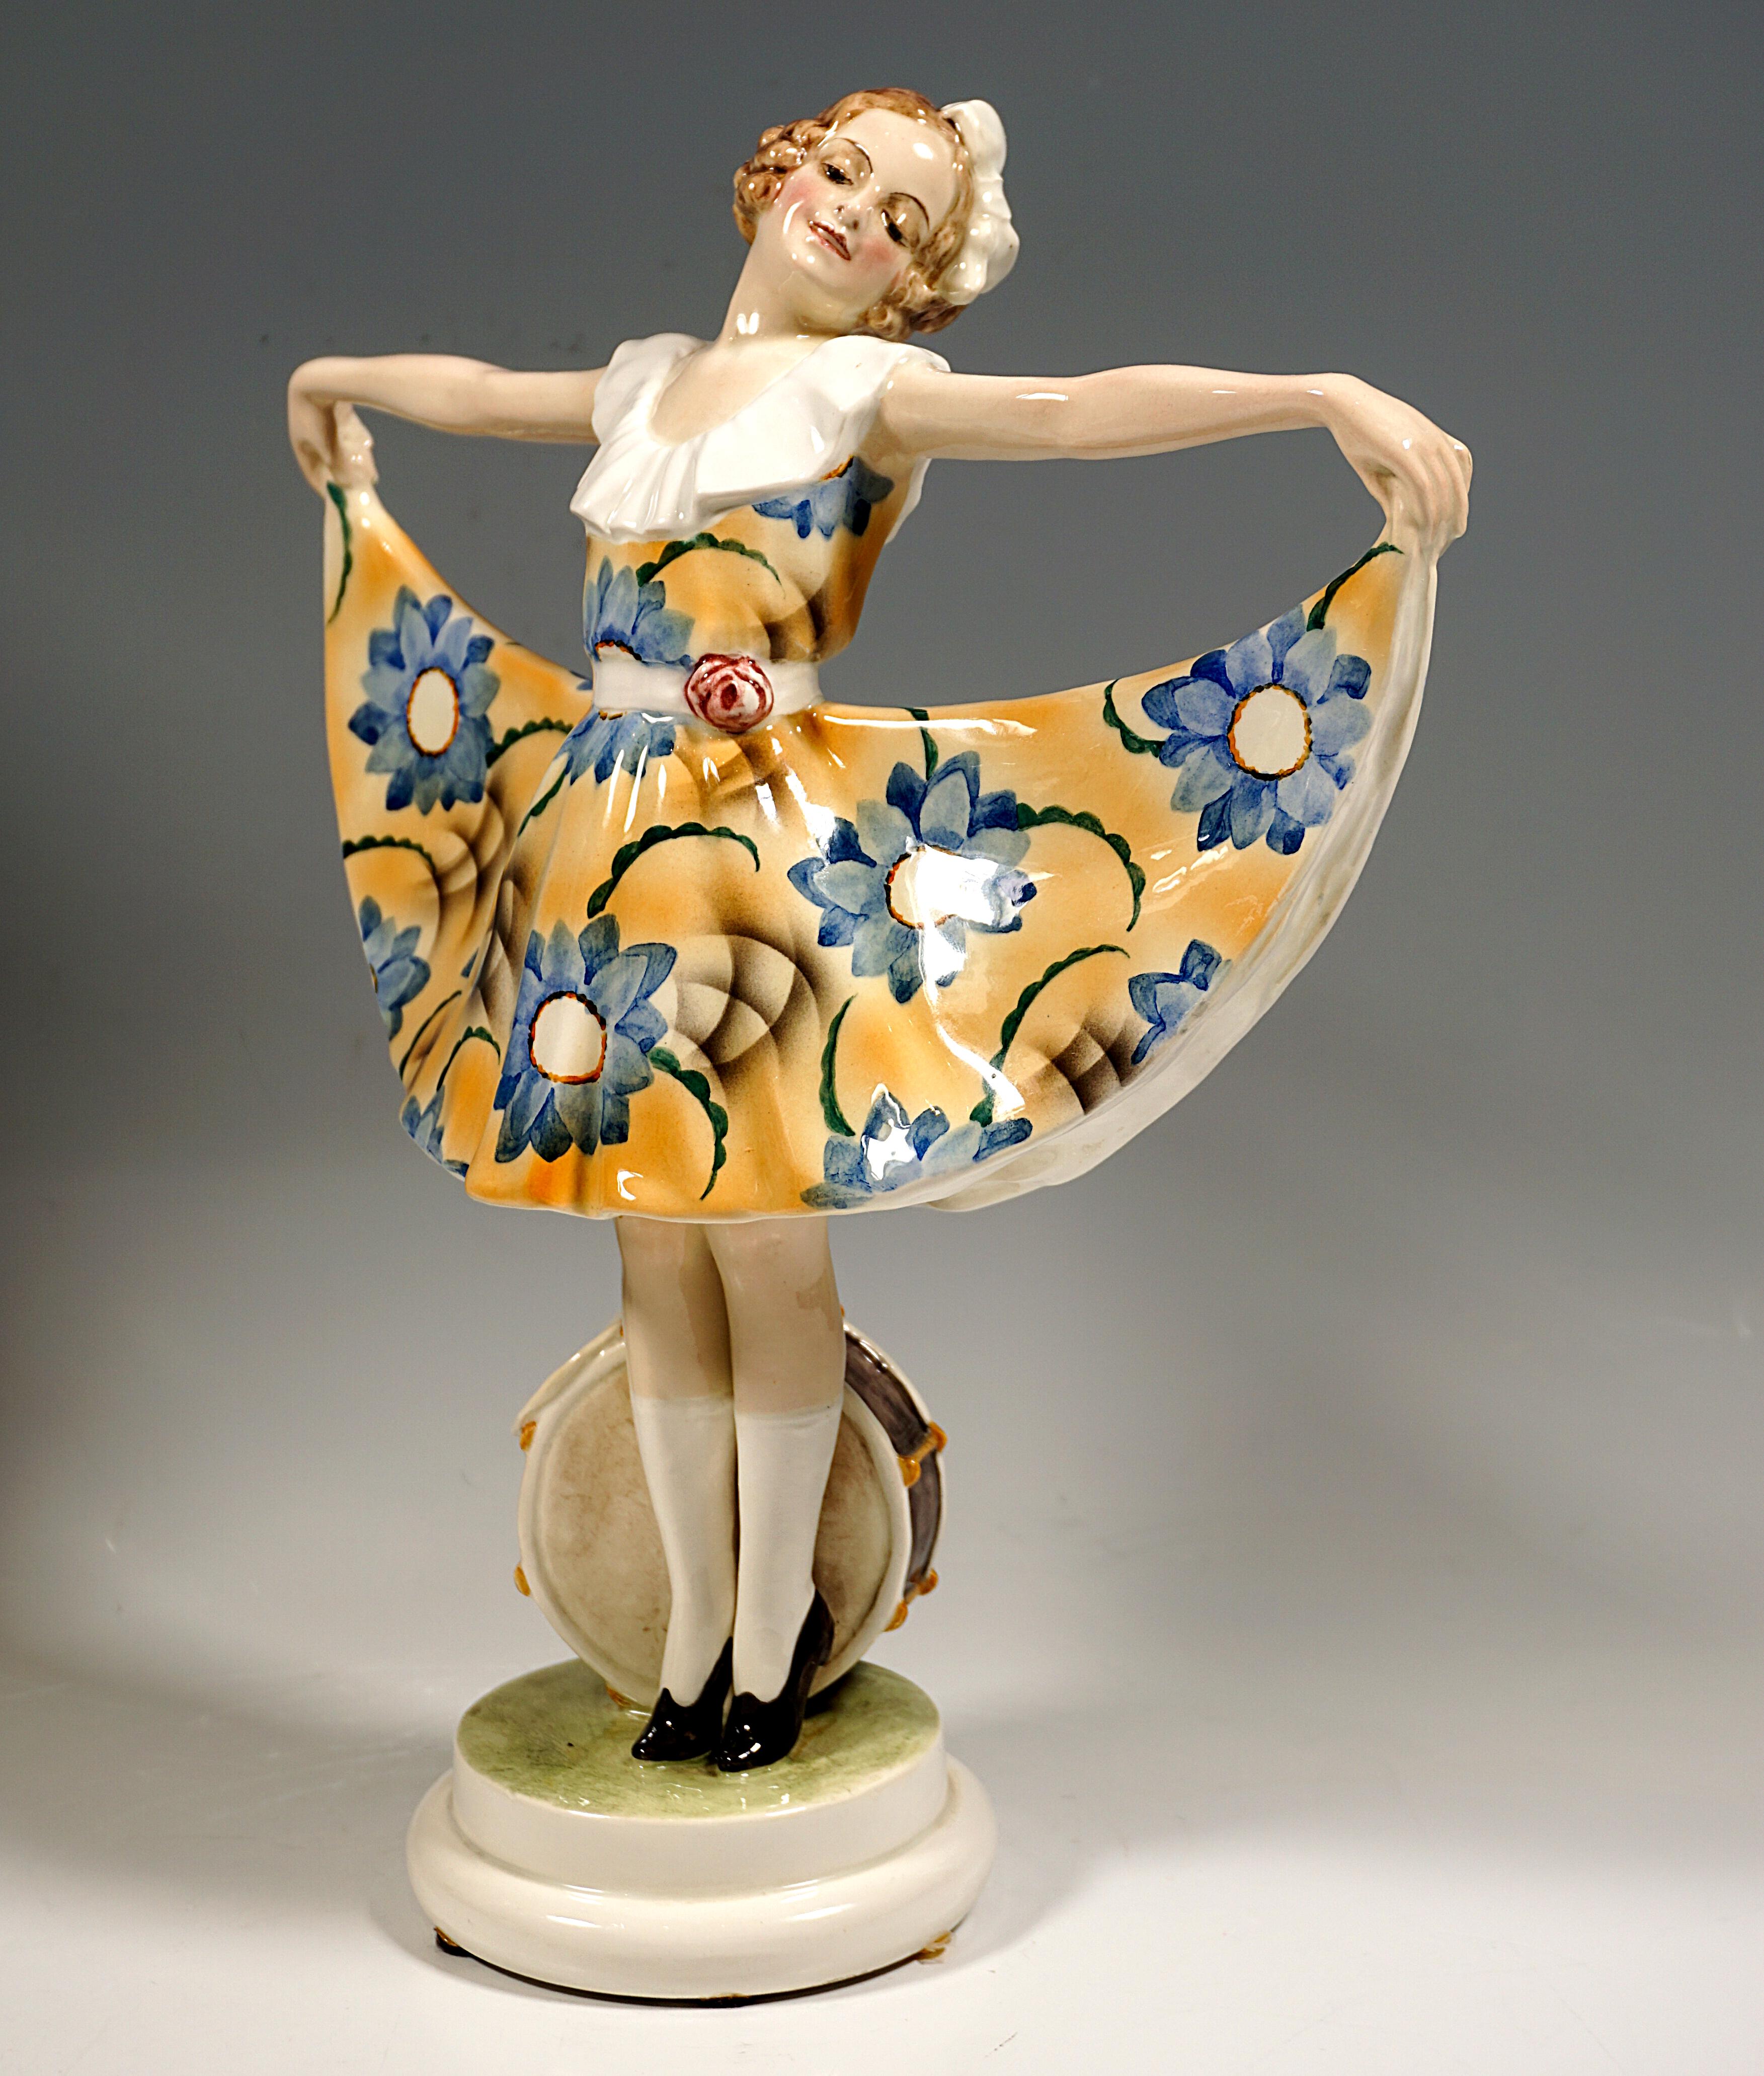 Rare Goldscheider Ceramics Figure of the 1920s.
Representation of a young dancer in a knee-length dress with a white flounce neckline, elaborately decorated with blue flowers against a yellow background, with her arms outstretched to the side,